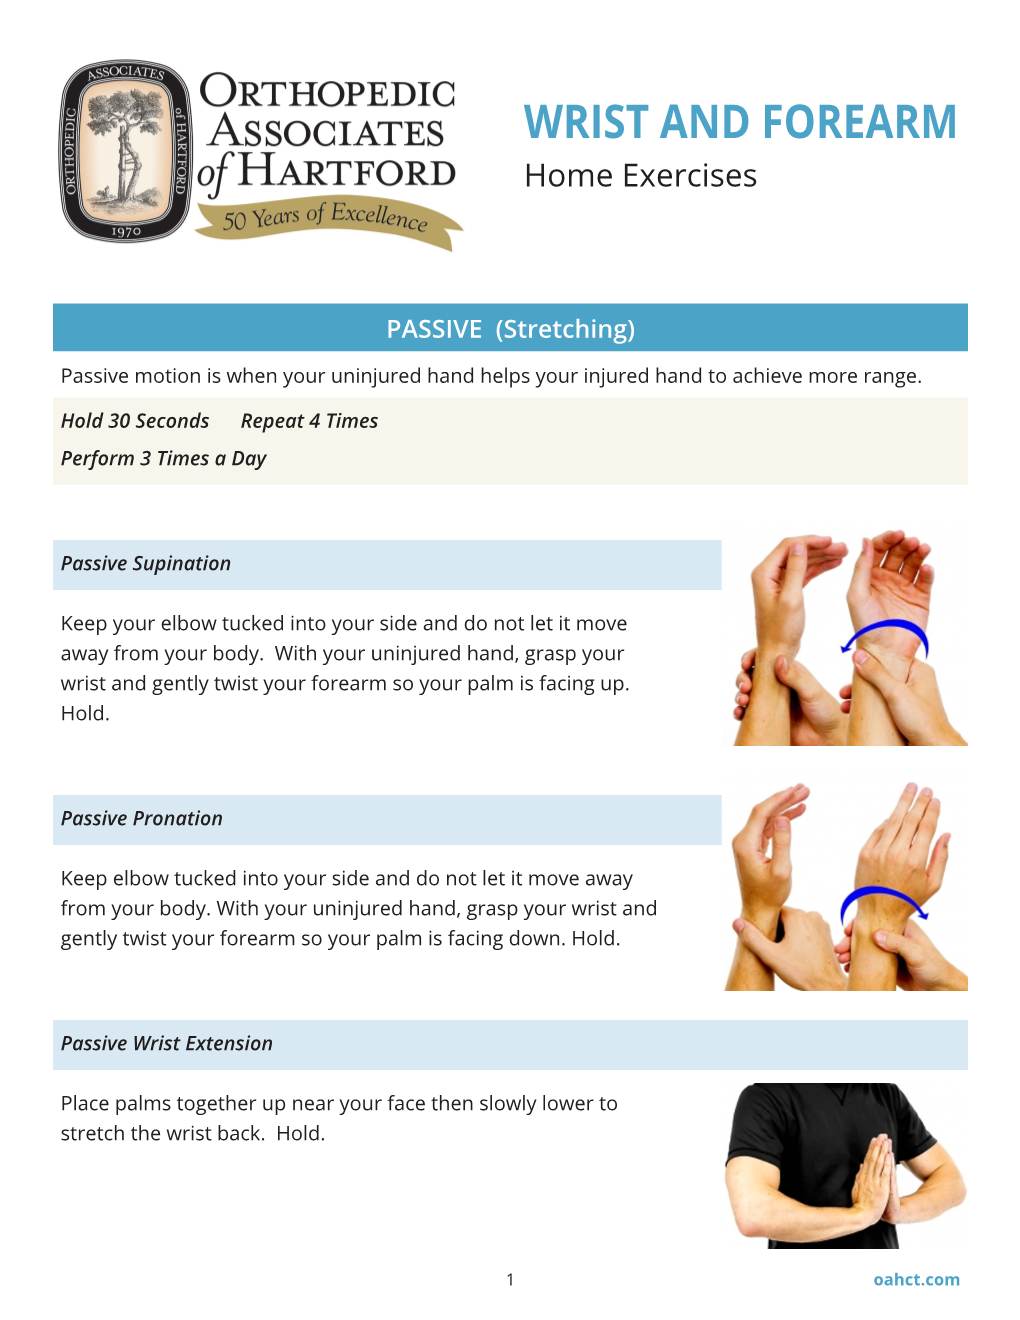 WRIST and FOREARM Home Exercises